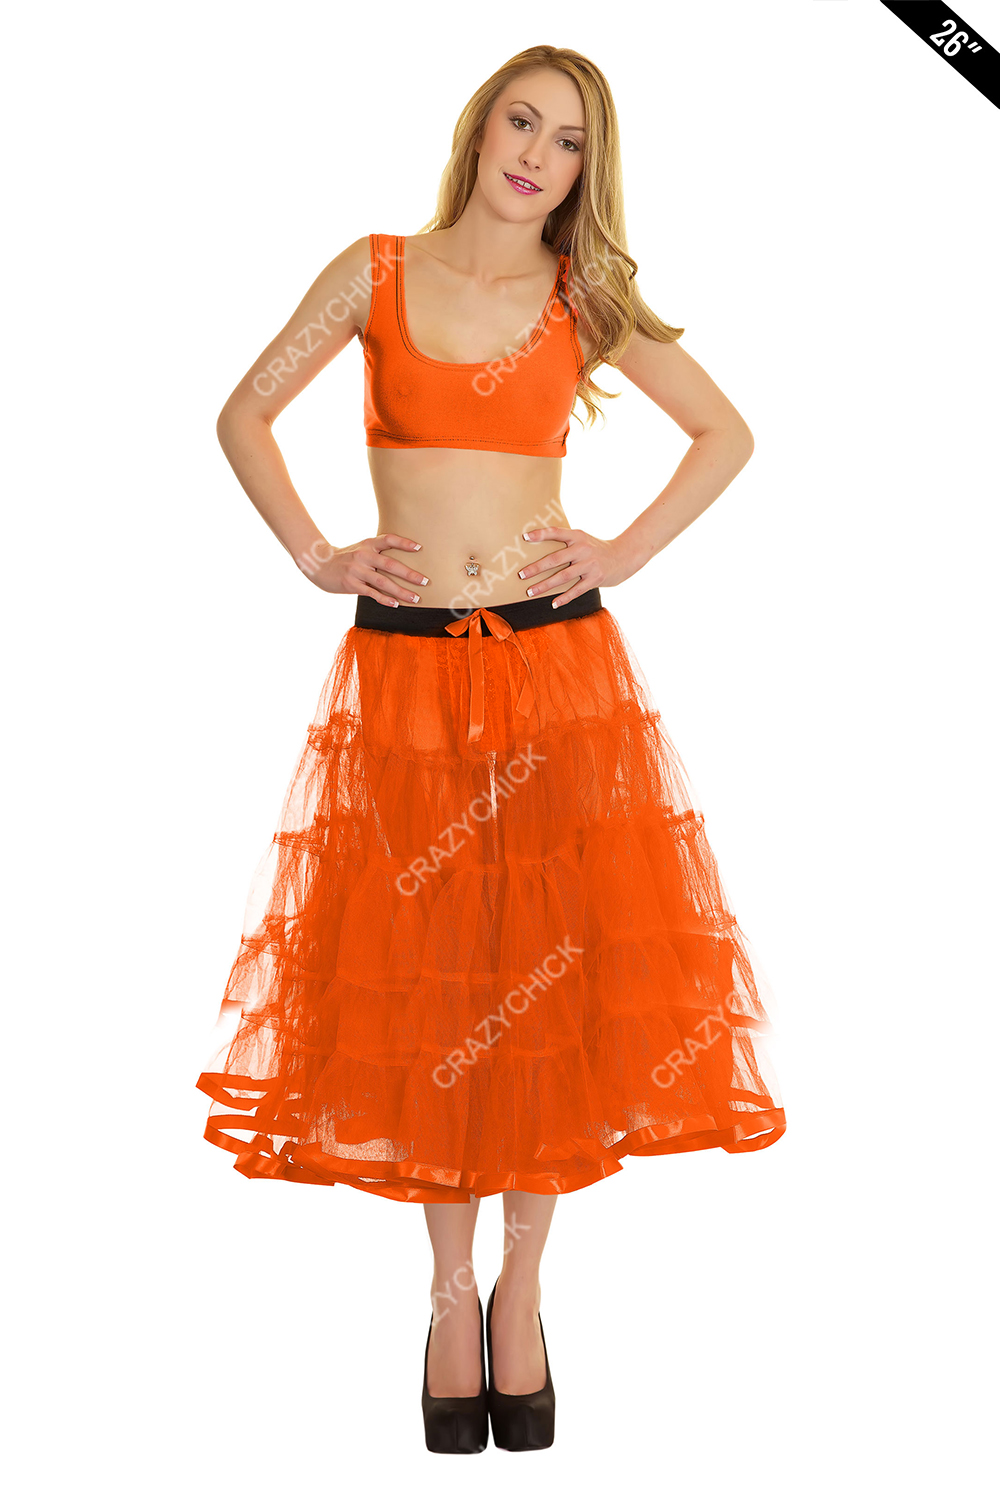 Crazy Chick Adult 5 Tier Petticoat with Ribbon Orange Tutu Skirt (Approximately 26 Inches Long)